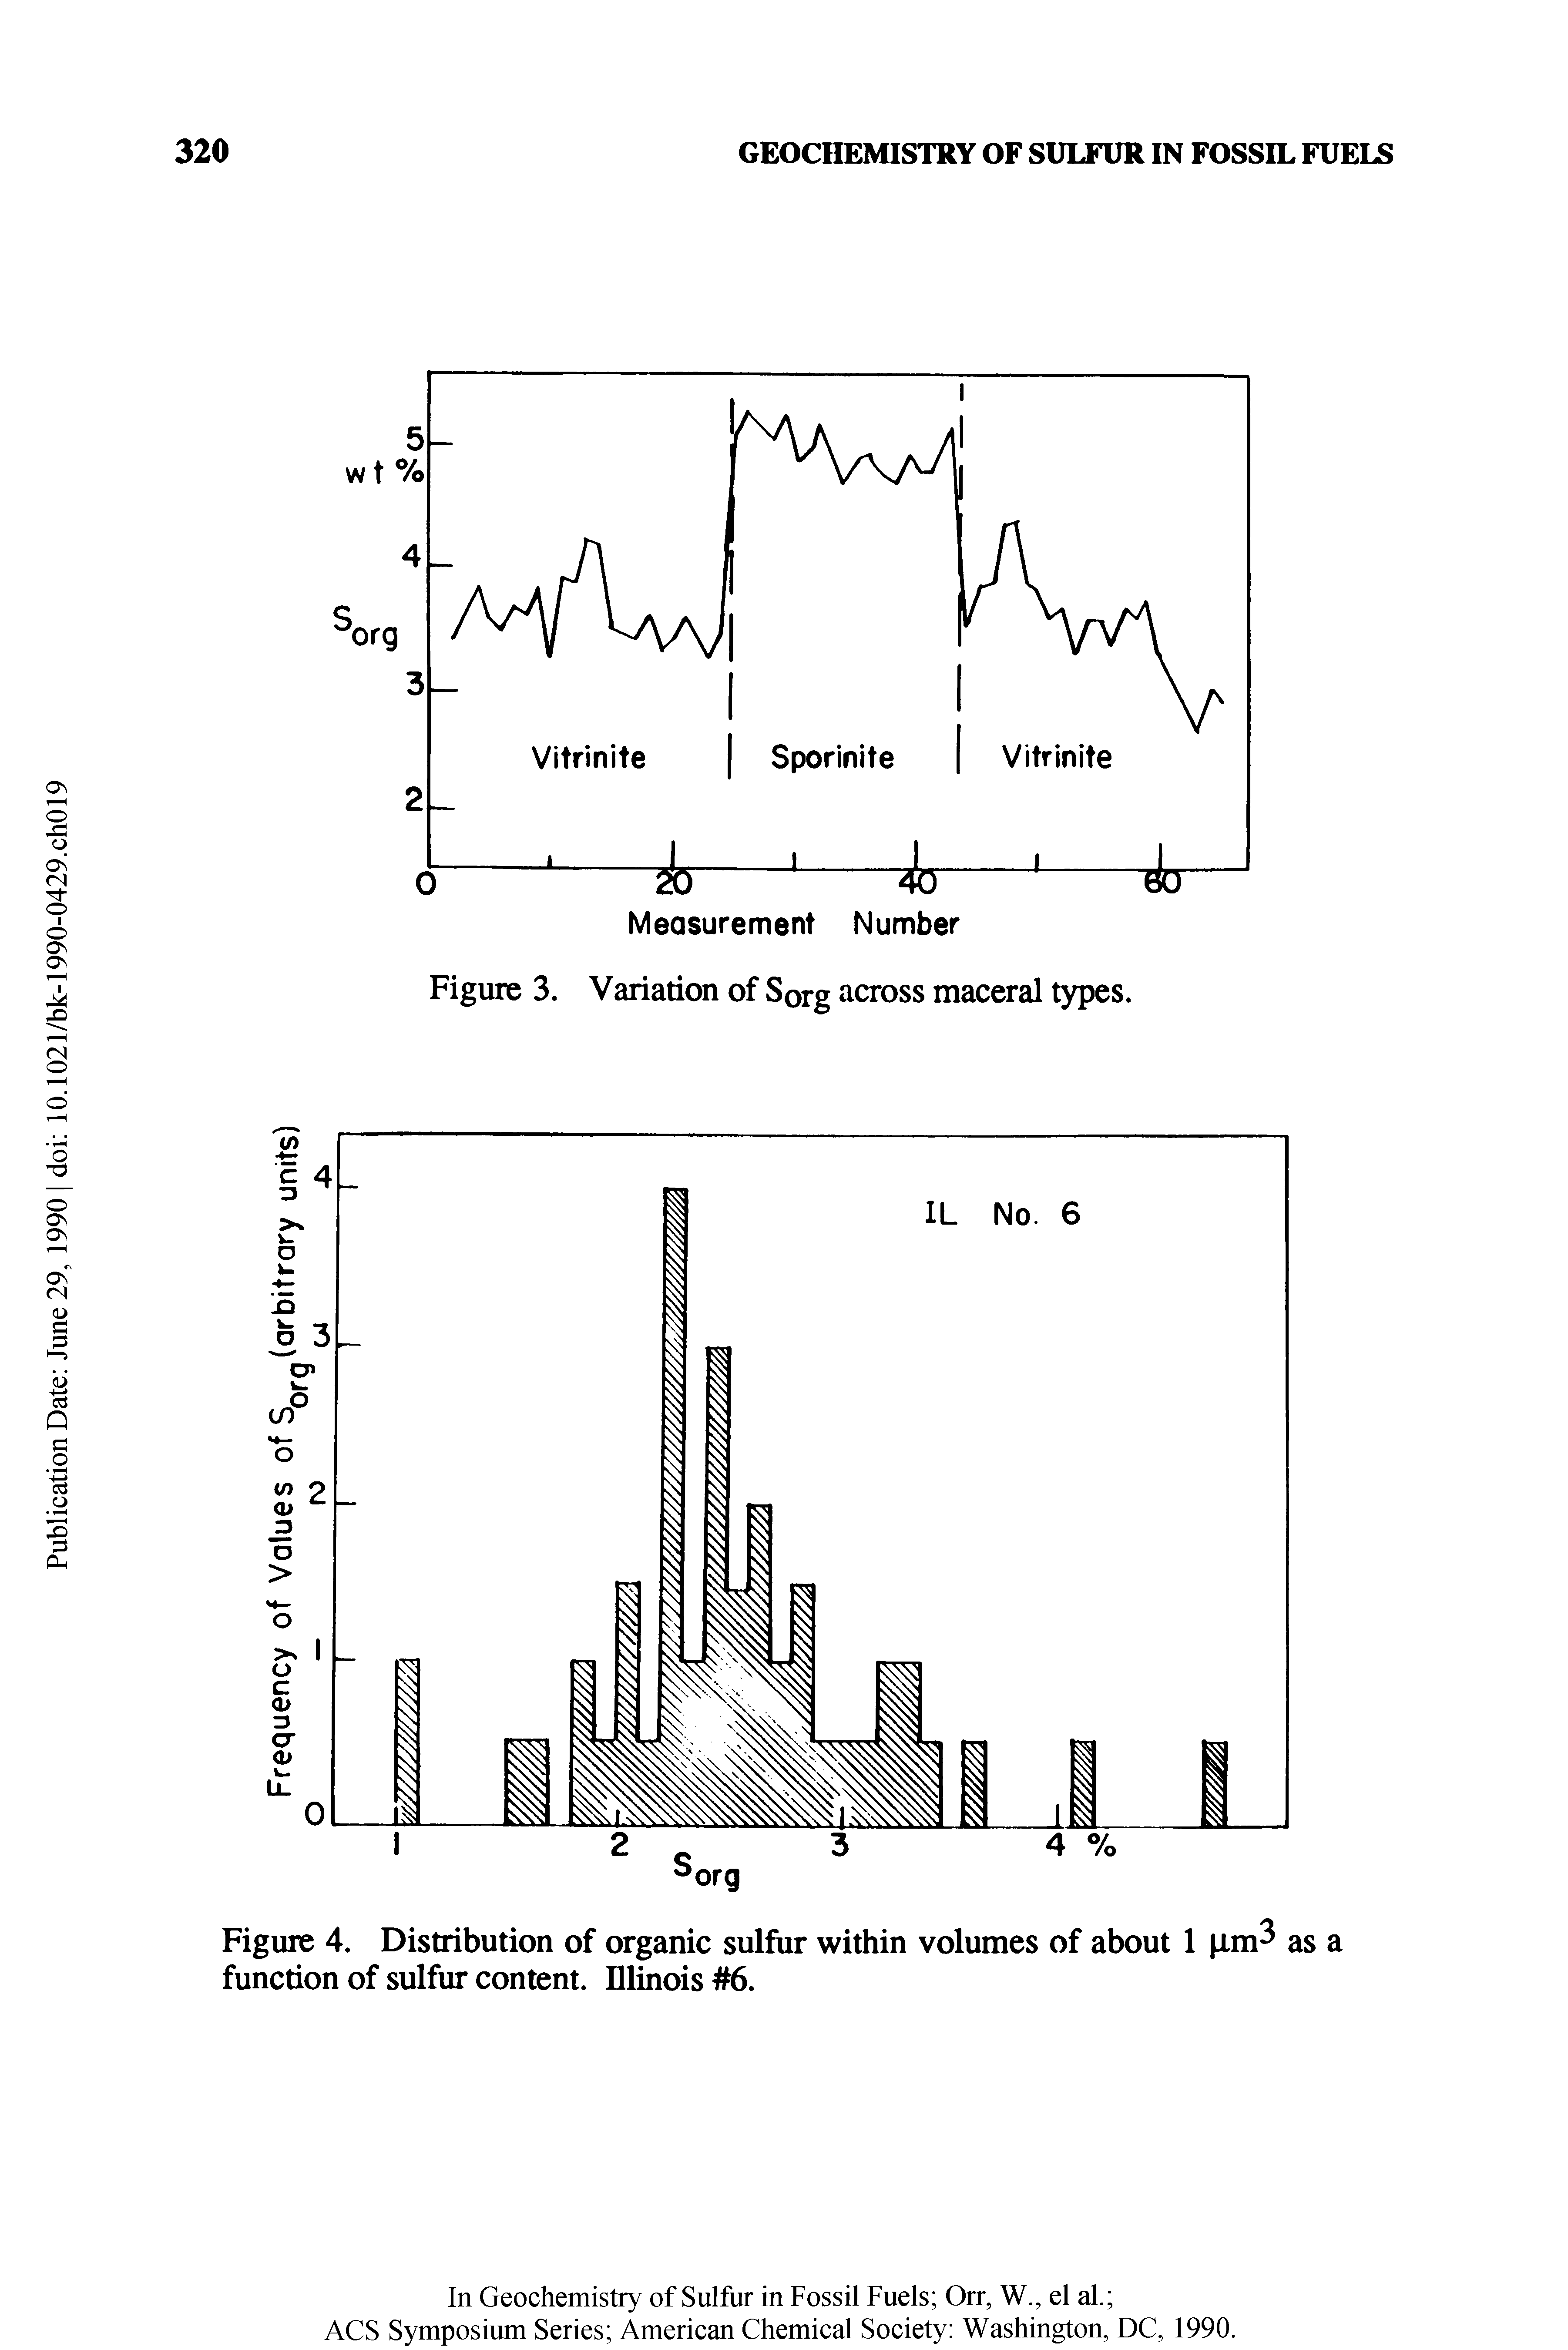 Figure 4. Distribution of organic sulfur within volumes of about 1 im as a function of sulfur content. Illinois 6.